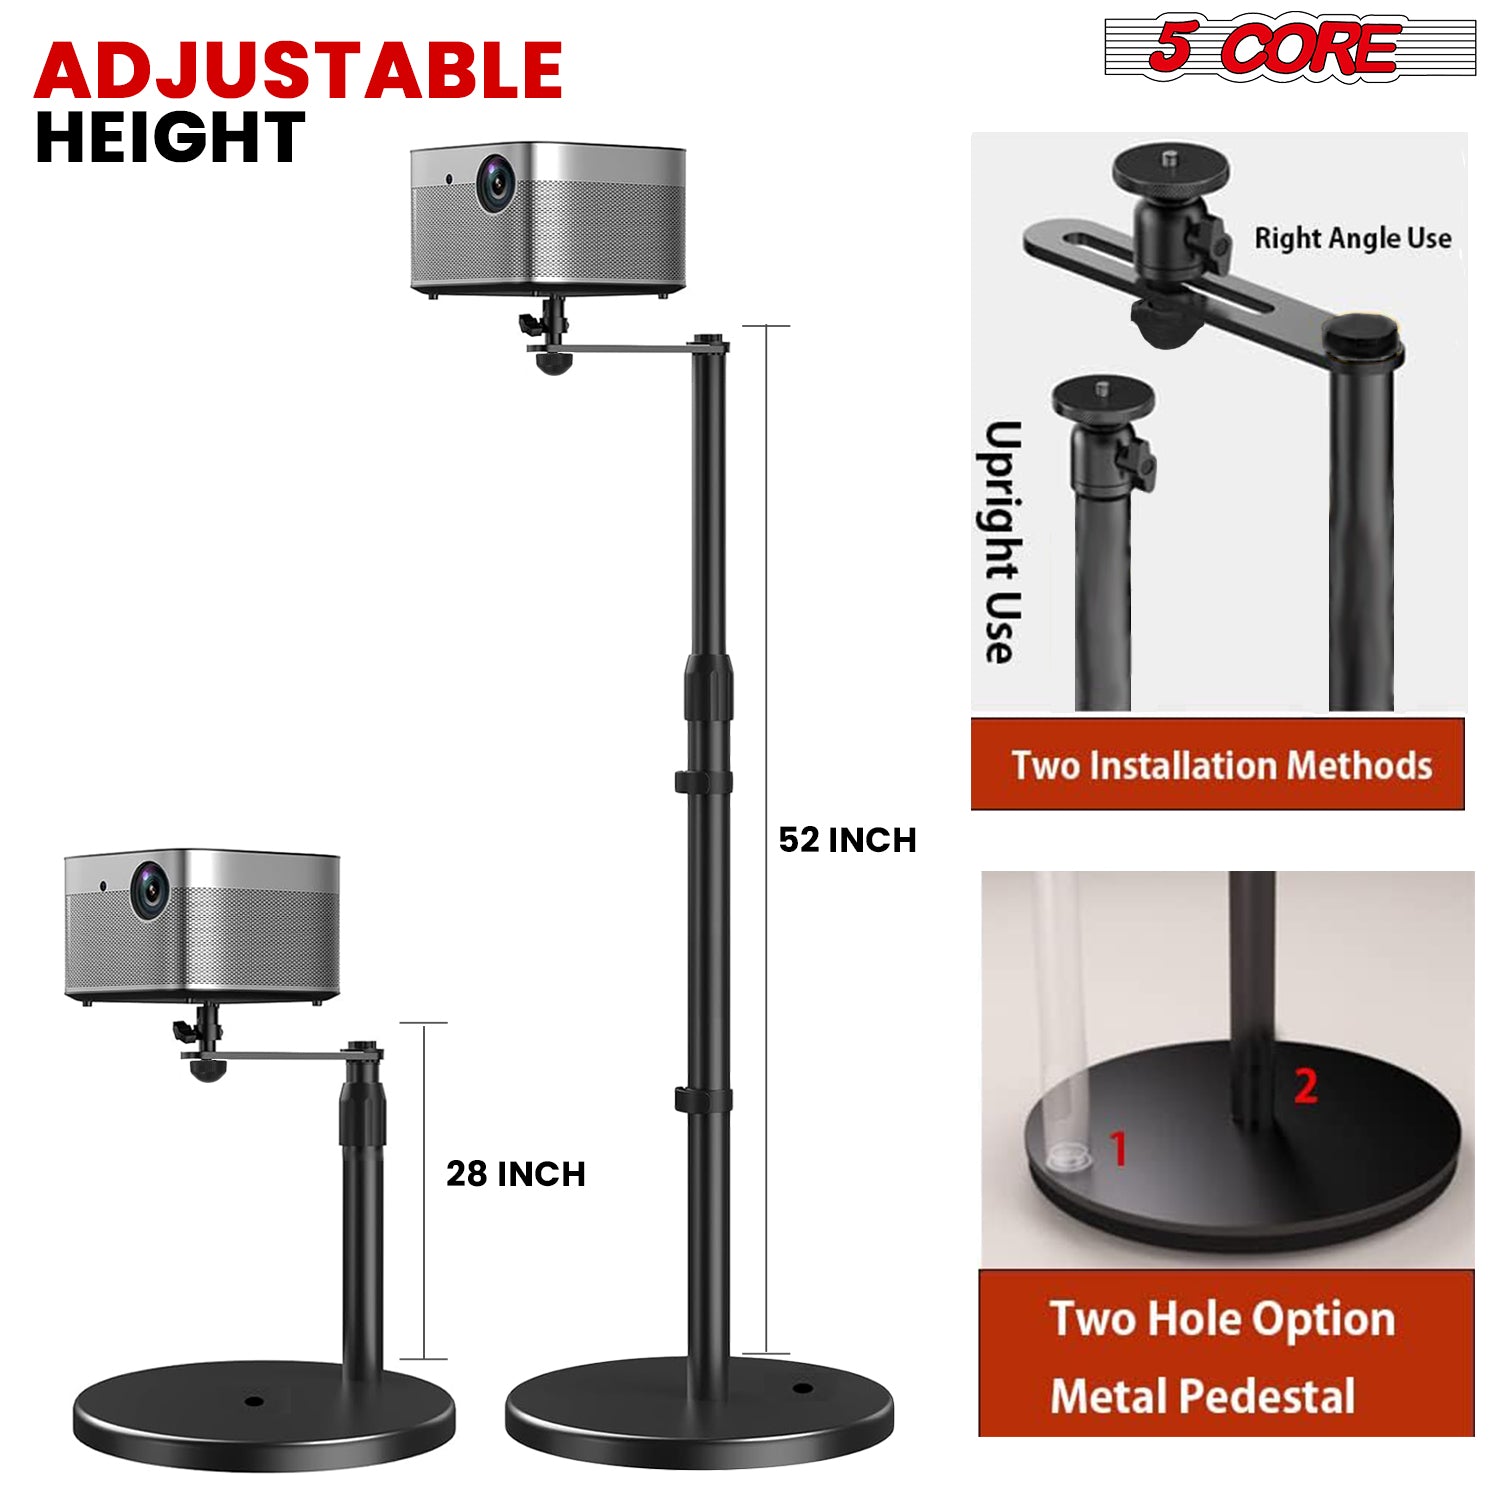 5 Core Projector Stand Height adjustable 28"-52"  Tall Floor Stands w 3 Mounting Options 360° Rotatable Ball Head Heavy Duty Multipurpose Soporte Para Proyector for Home Office Outdoor 1PC Black – PS FLR RB BLK